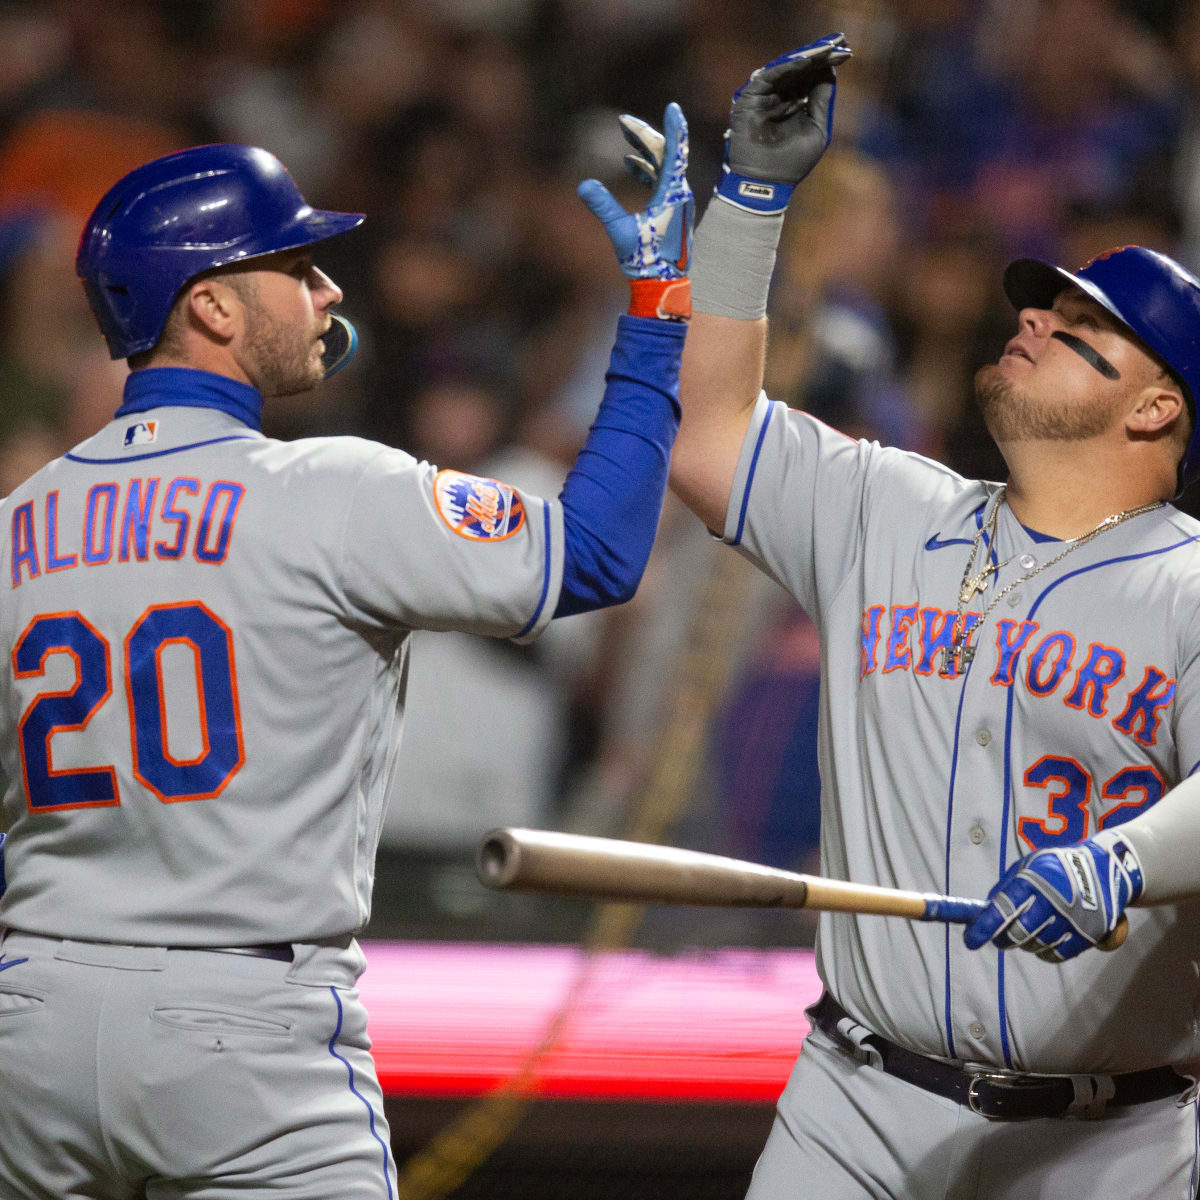 New York Mets slugger Pete Alonso 'all-in' to defend Home Run